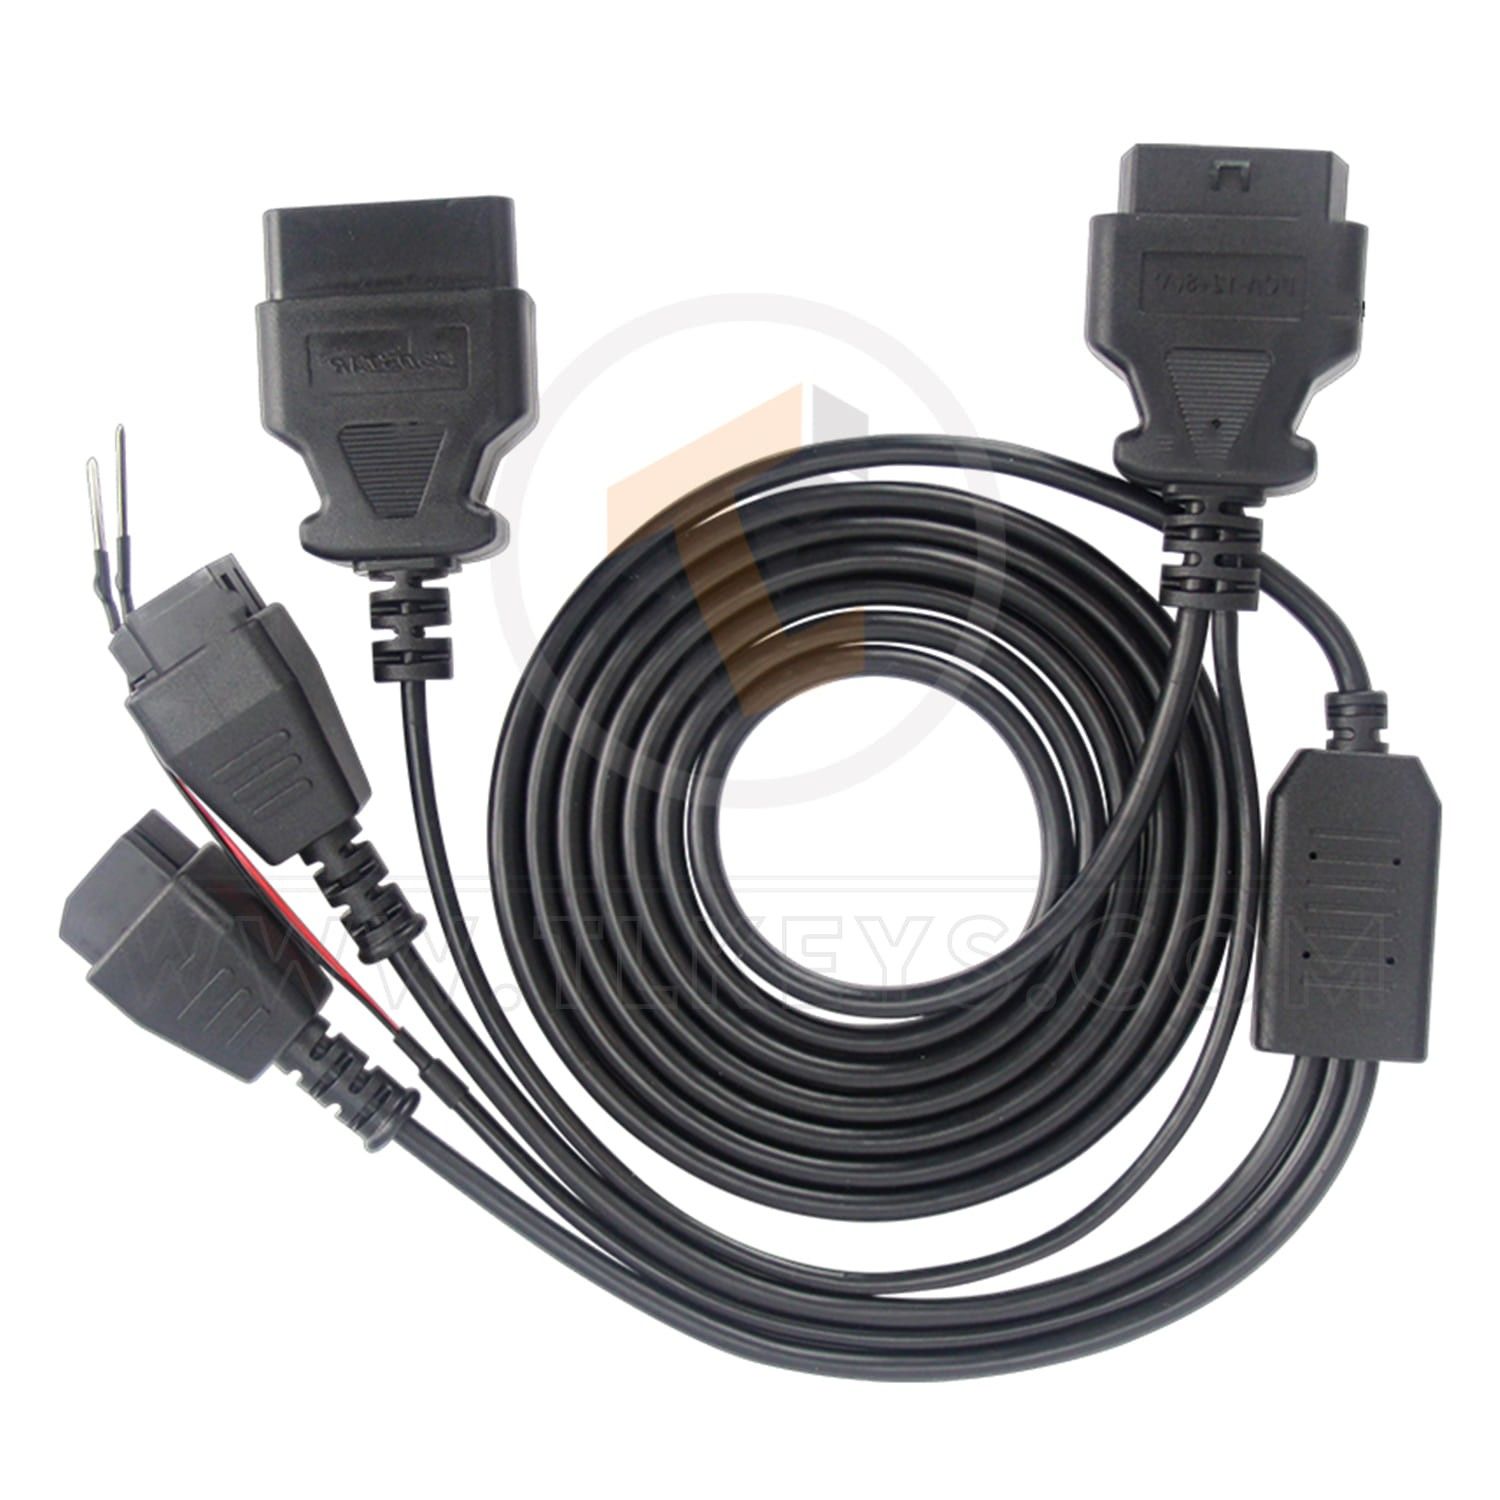 cables OBDSTAR FCA 12+8(A) Cable for Chrysler Dodge Jeep